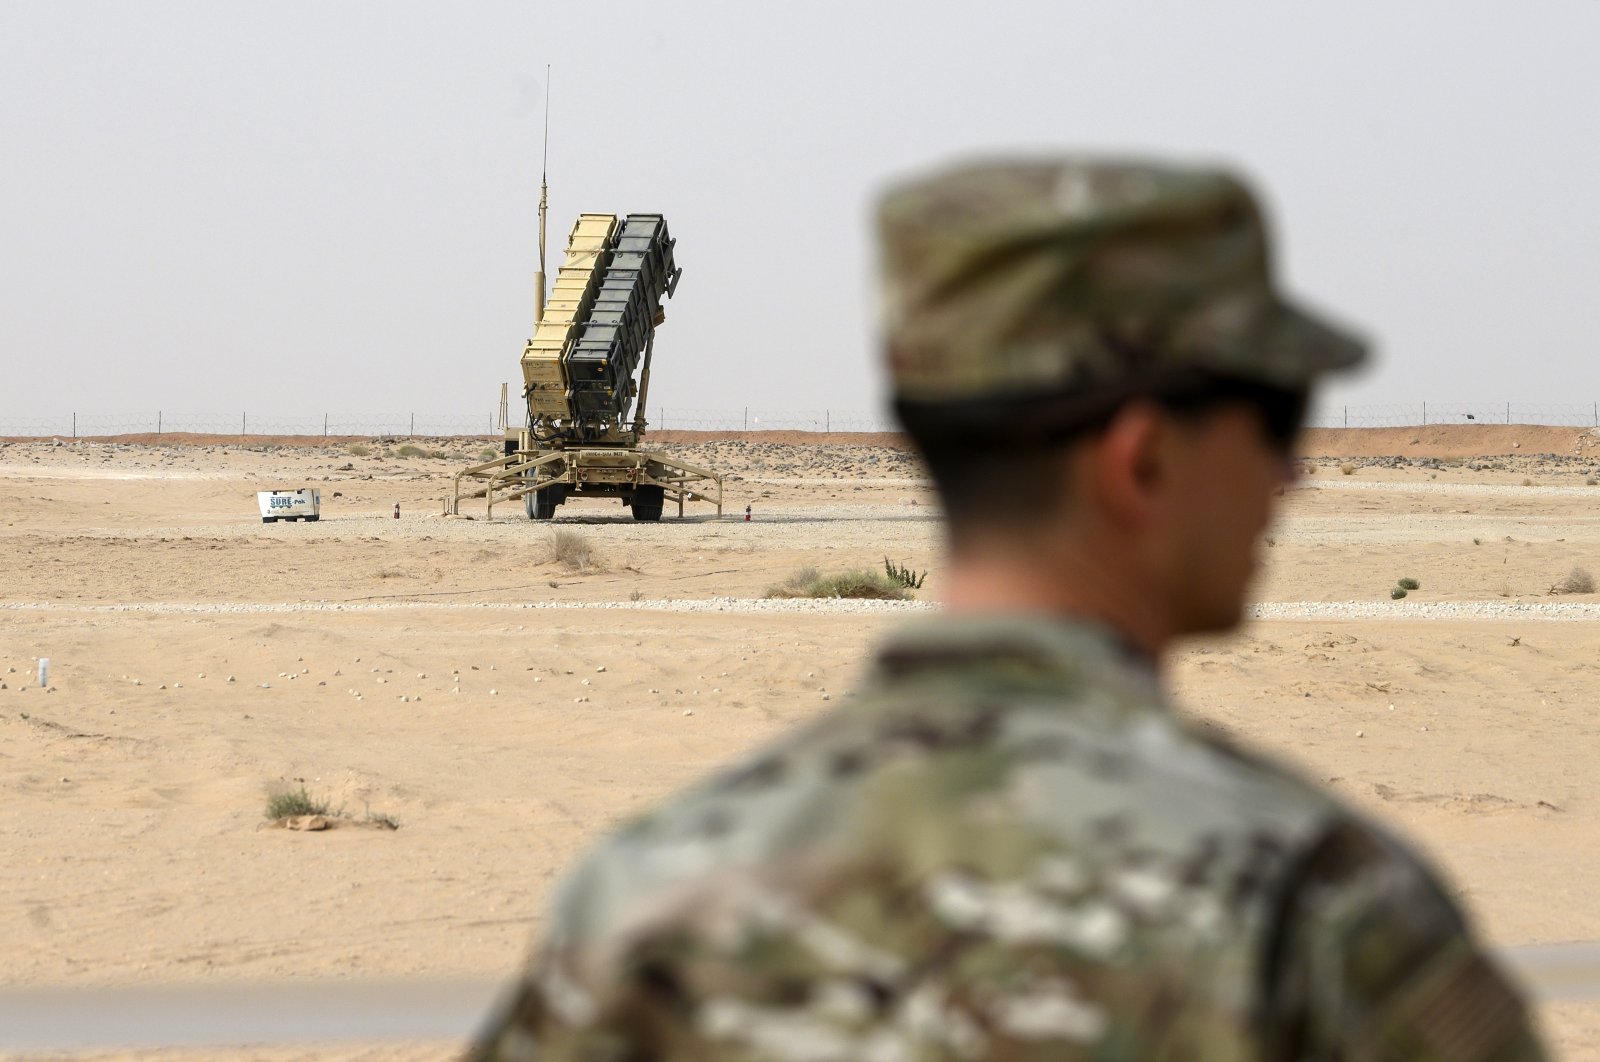 In this file photo, a member of the U.S. Air Force stands near a Patriot missile battery in al-Kharj, Saudi Arabia, Feb. 20, 2020. (AP Photo)